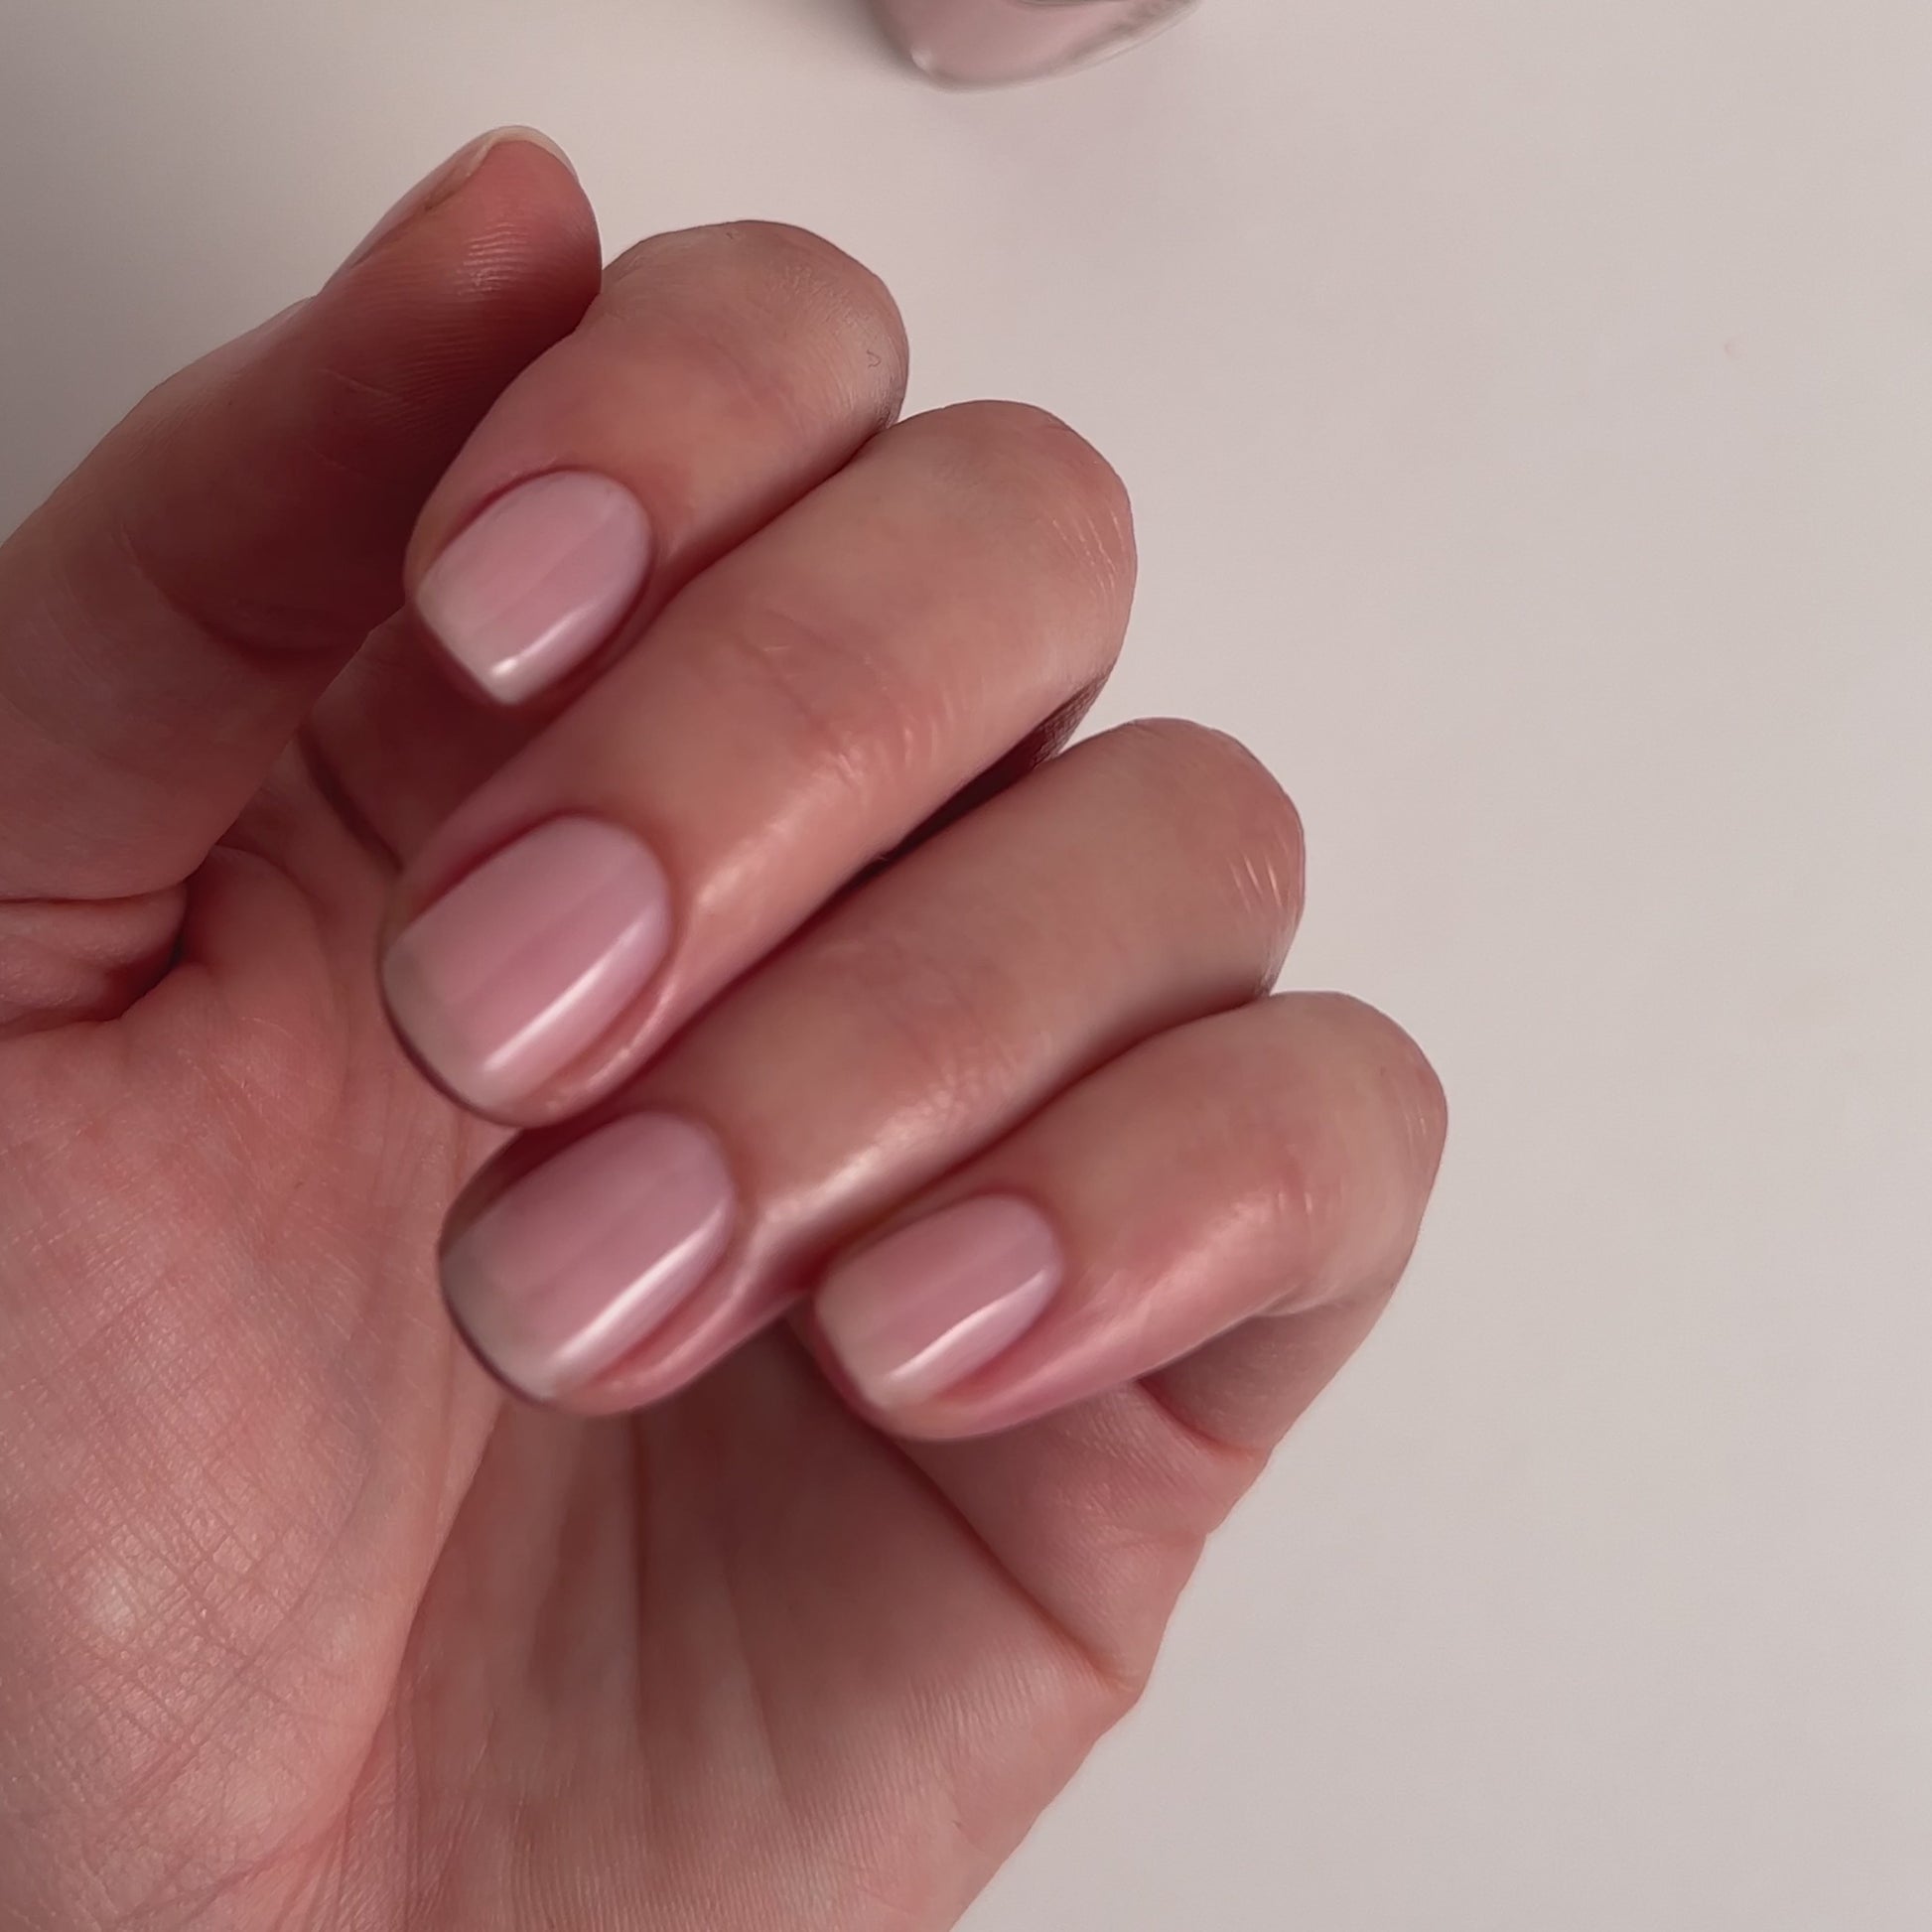 ml Mademoiselle Colour Pink 13 Vibes Nail Polish The 13.5 – Good Essie Baby